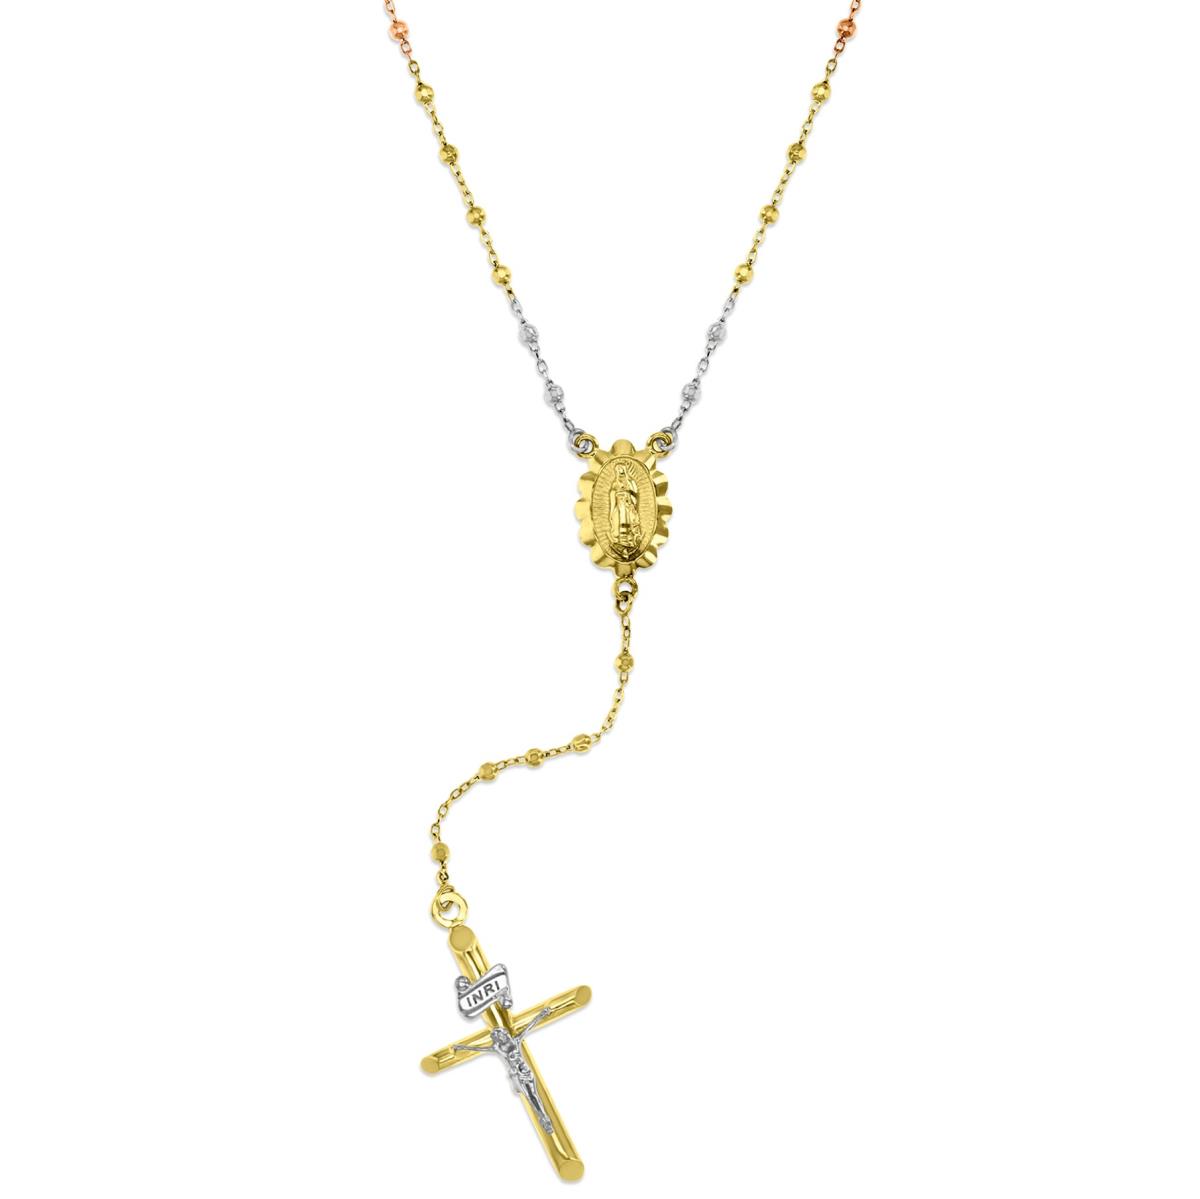 14K Gold Tricolor 1.80MM Diamond Cut Beads Rosary Necklace